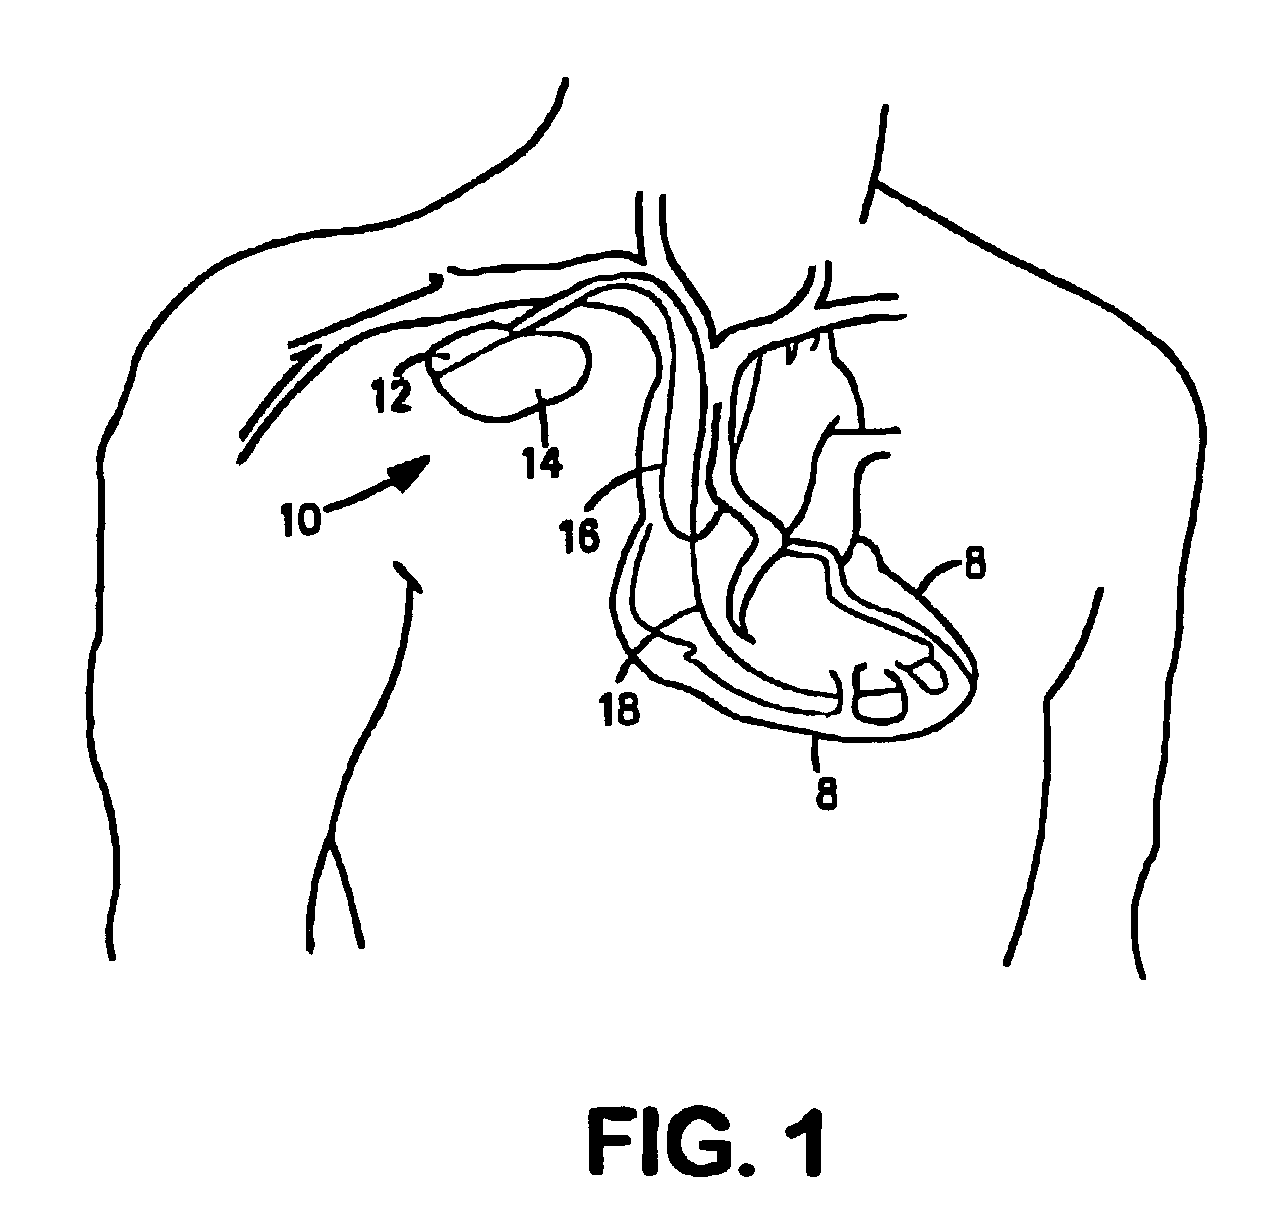 Ultrasound methods and implantable medical devices using same